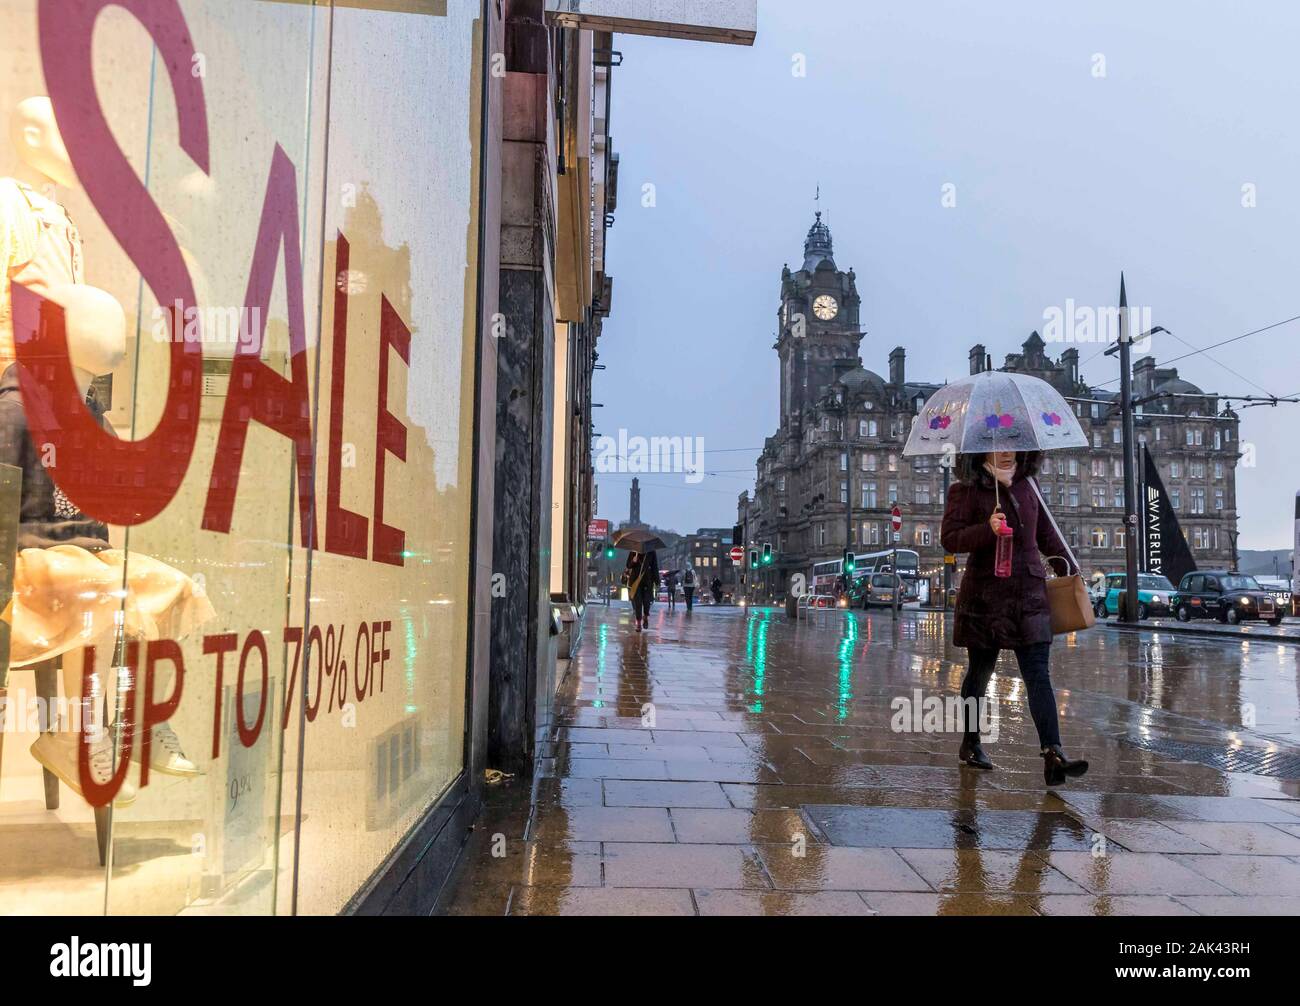 Edinburgh, United Kingdom. 07 January, 2020 Pictured: Strong winds hit Scotland’s capital city disrupting commuters and shoppers. Credit: Rich Dyson/Alamy Live News Stock Photo